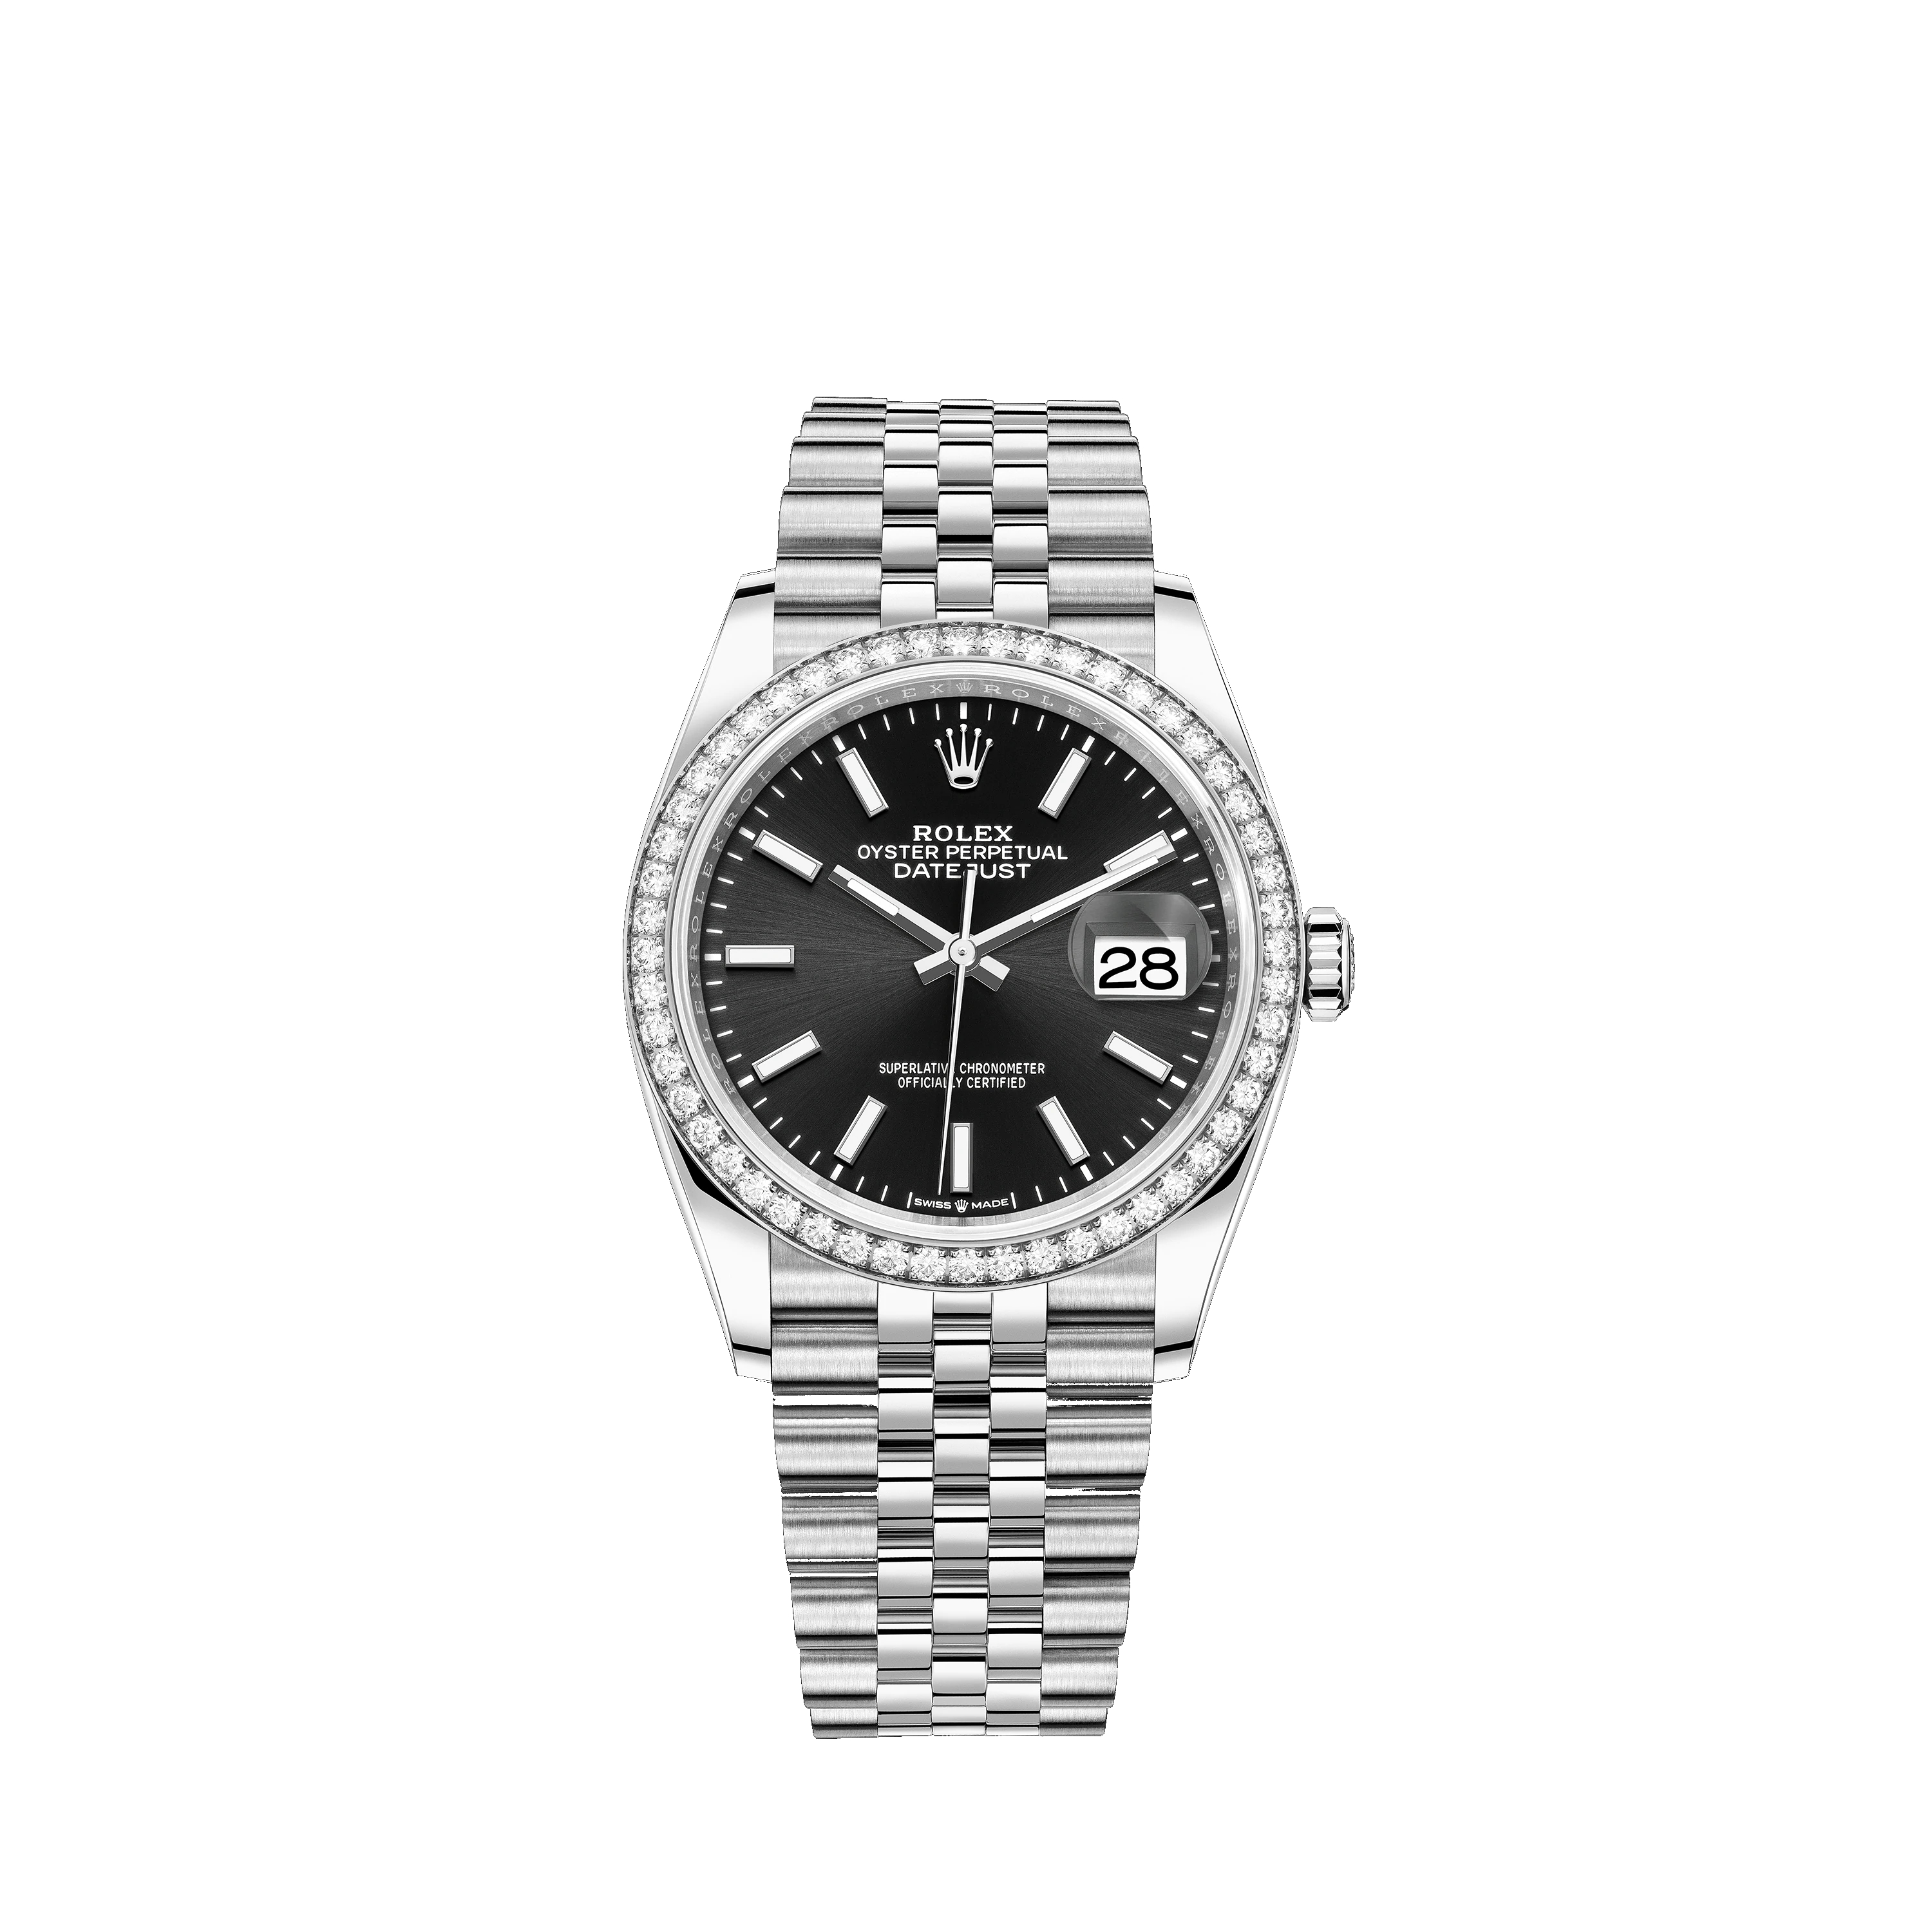 Datejust 36 126284RBR White Gold, Stainless Steel & Diamonds Watch (Black) - Click Image to Close